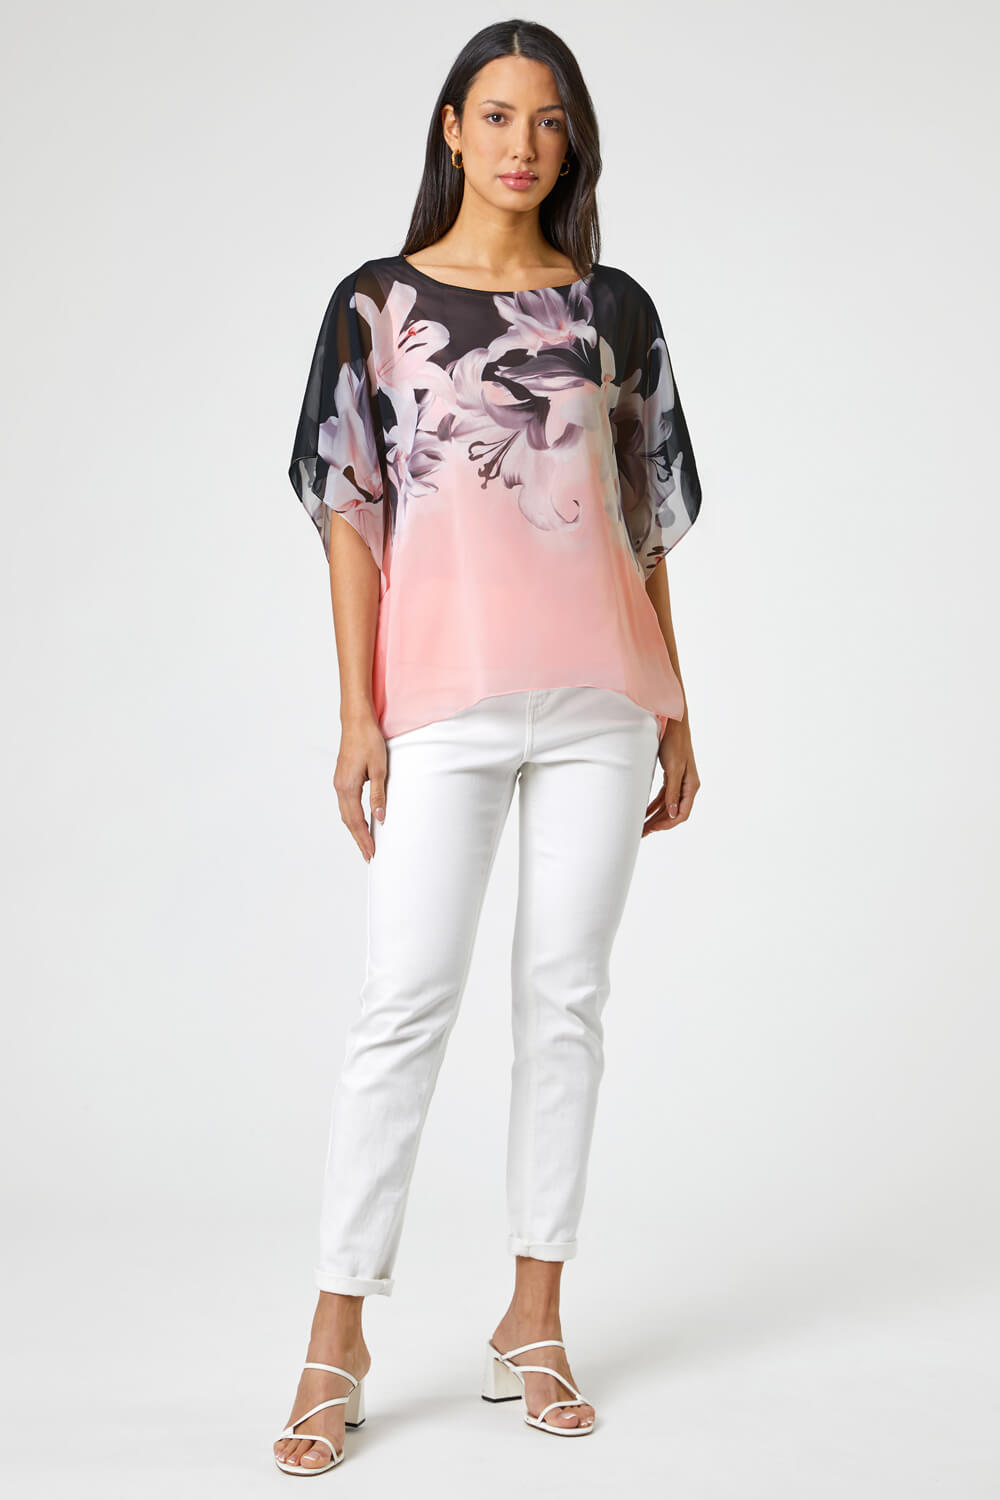 Light Pink Floral Border Print Overlay Top, Image 3 of 4